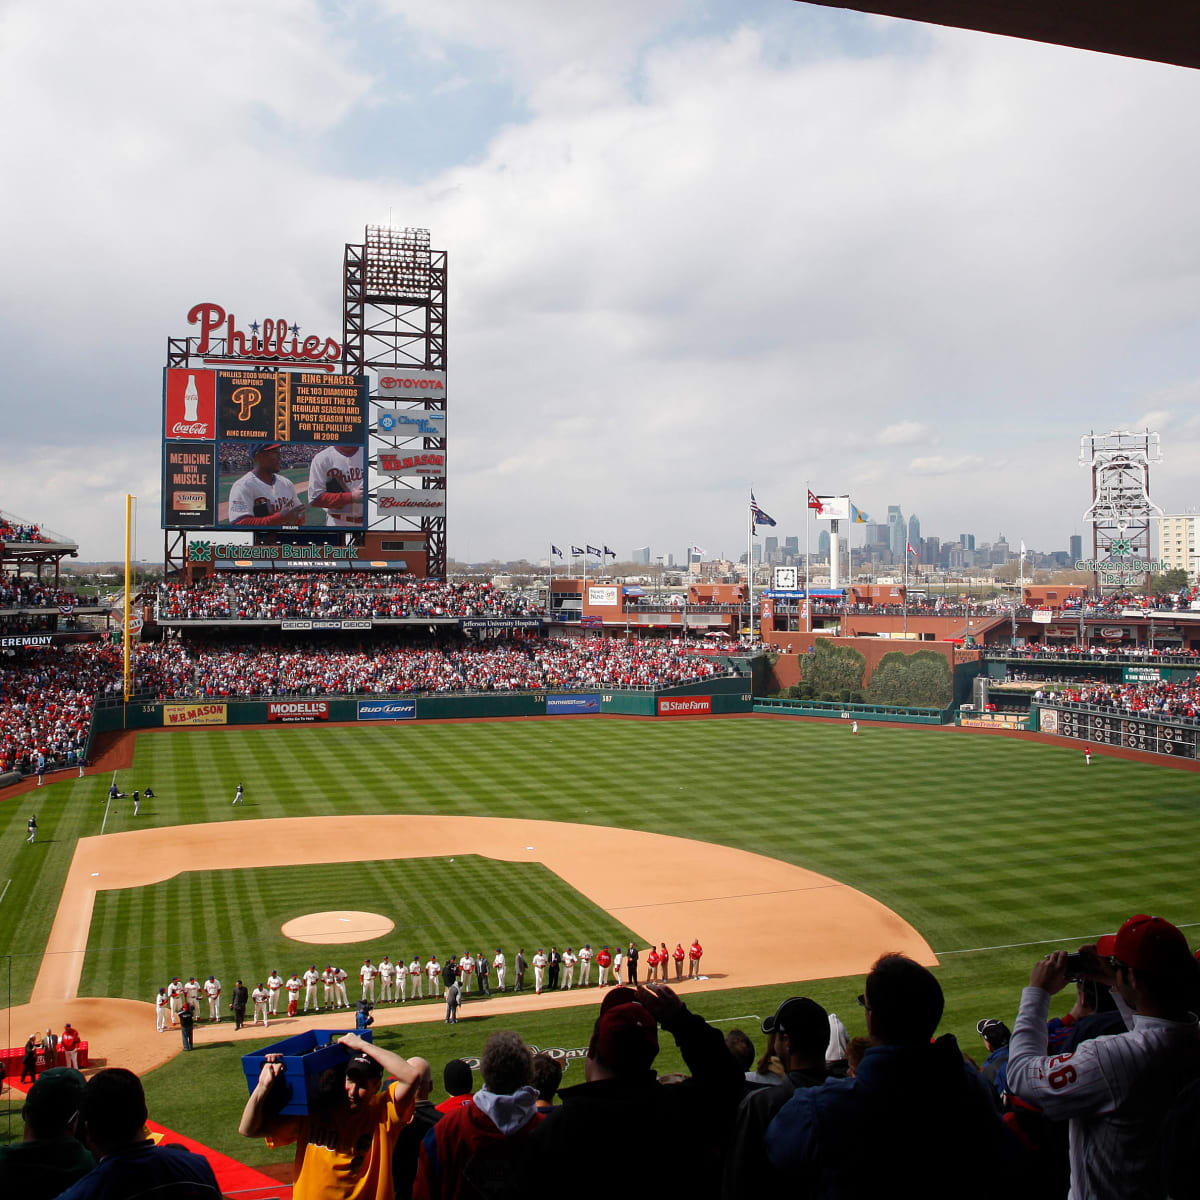 Phillies Edge Closer to World Series with Dominant Win over